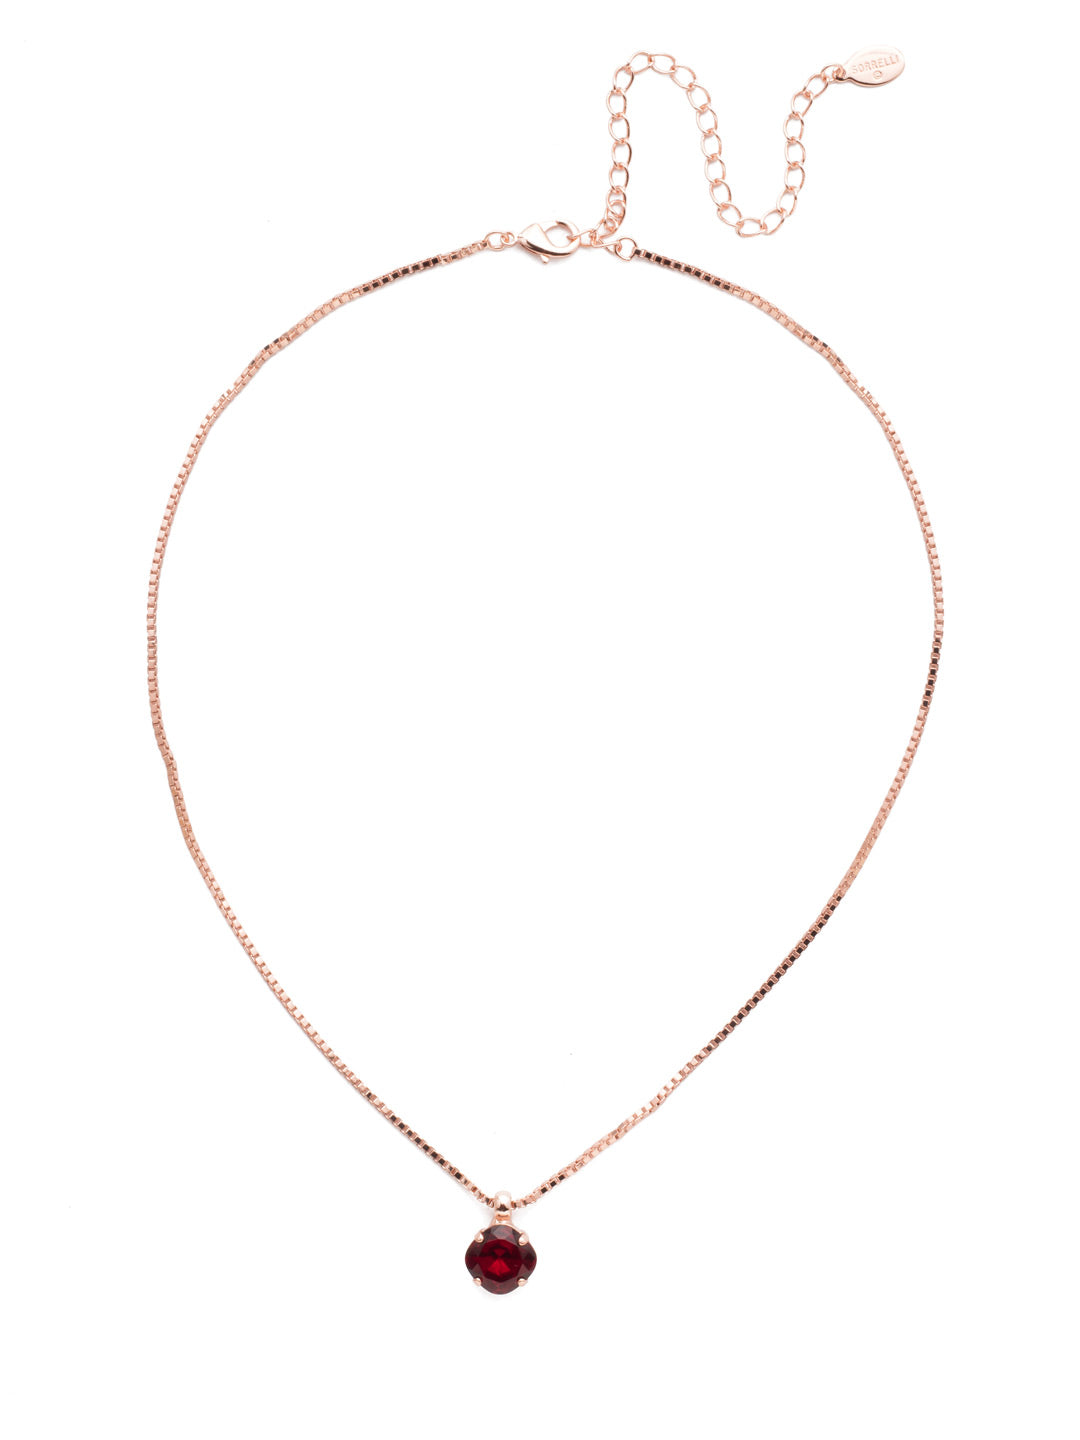 Halcyon Pendant Necklace - NEP23RGG - The Halcyon Pendant Necklace has a luminous cushion-cut crystal that looks beautiful with every outfit. From Sorrelli's GARNET collection in our Rose Gold-tone finish.